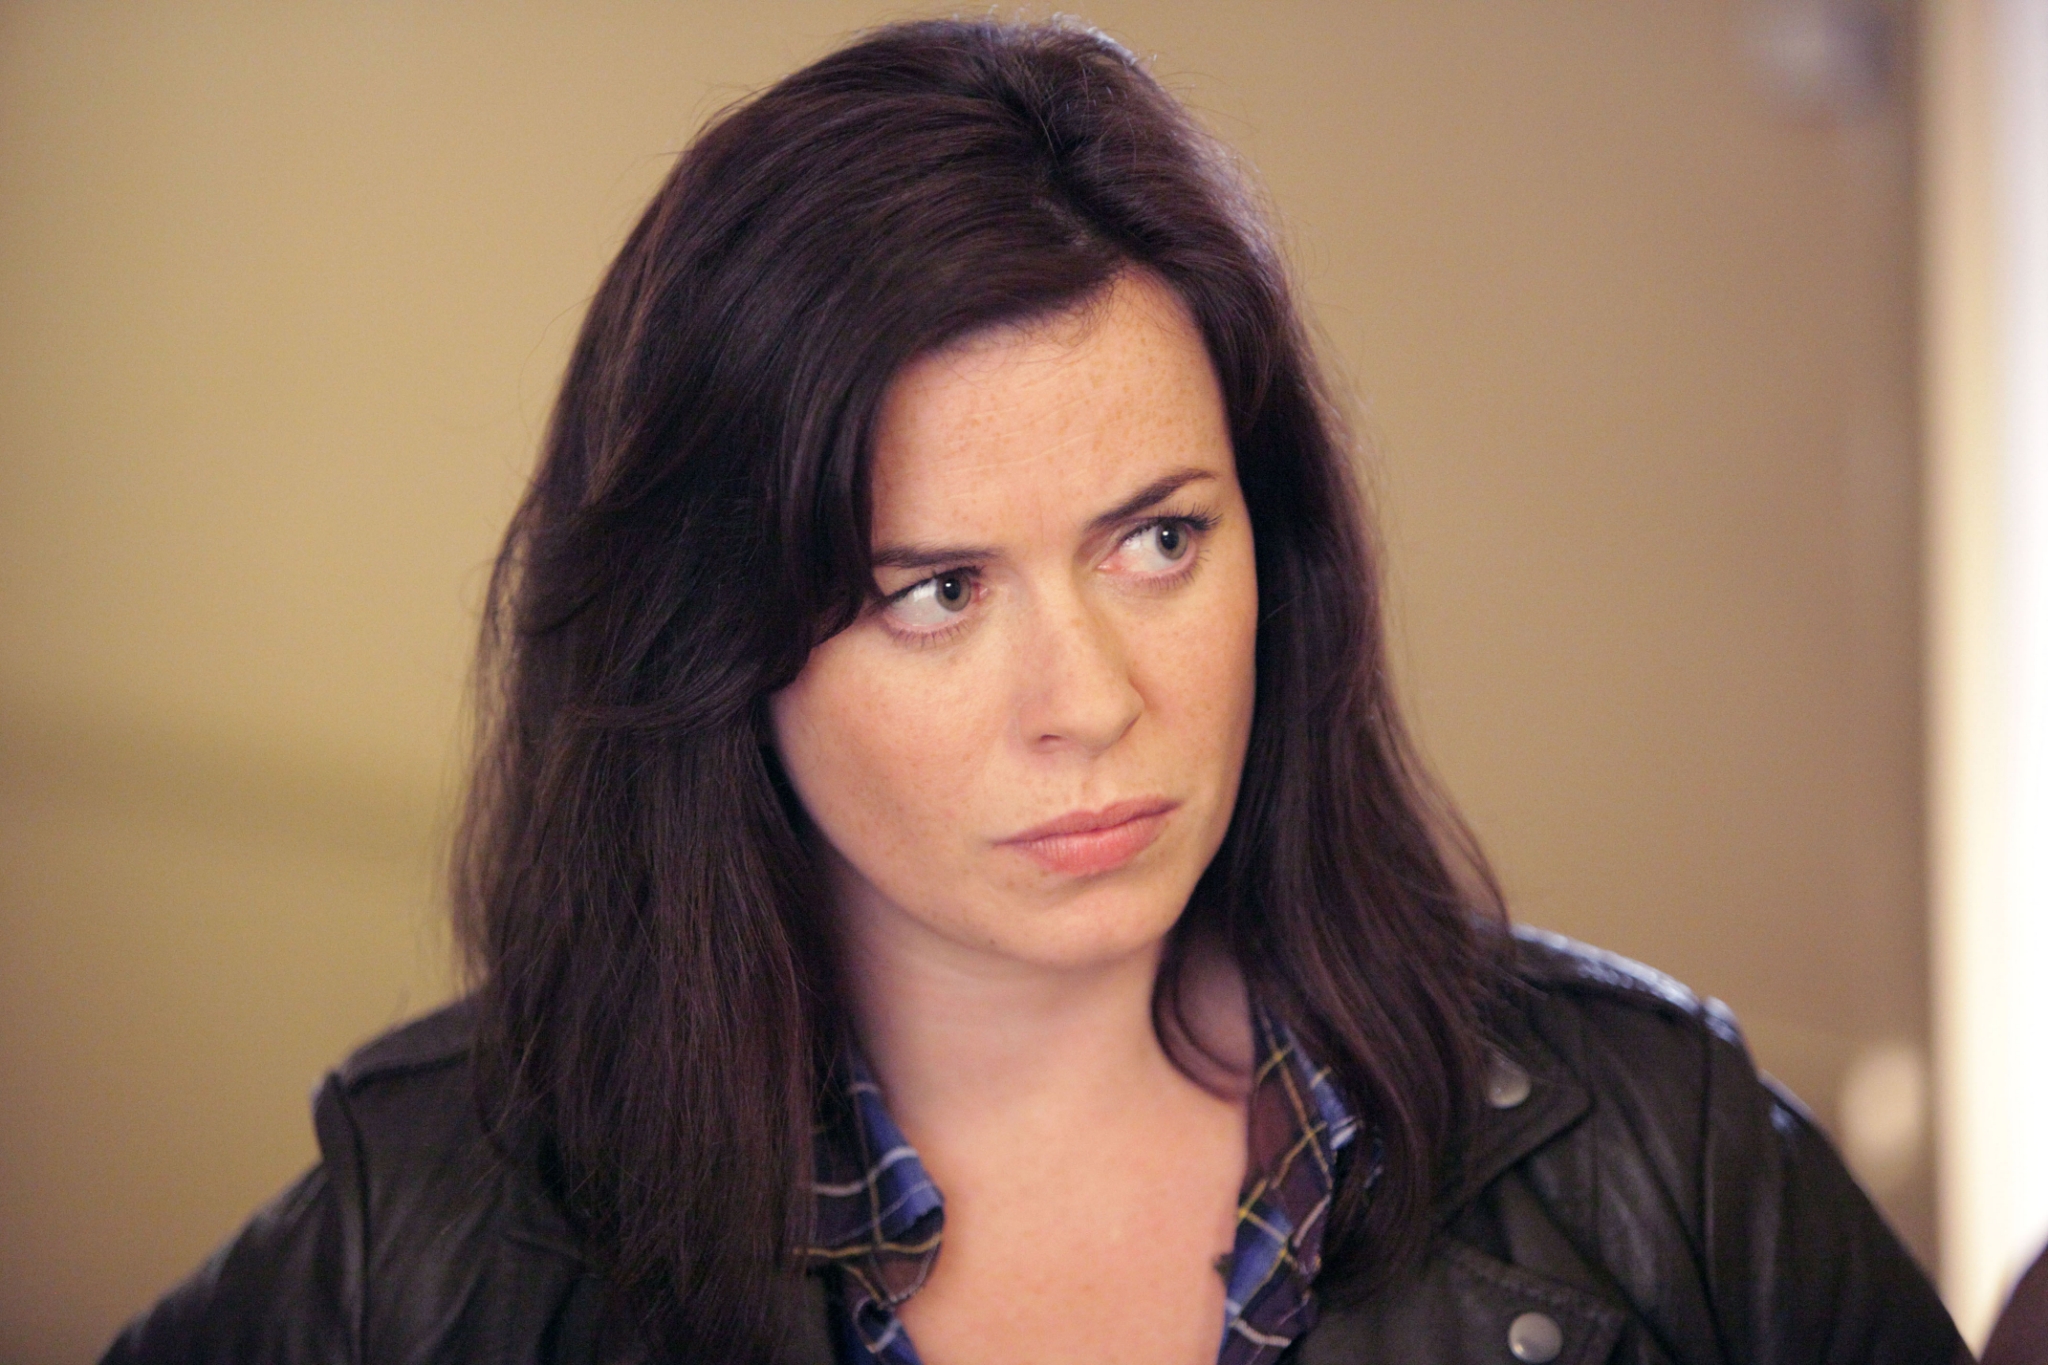 Click on any of the images to see them in their full high-res glory! - gwen-cooper-1